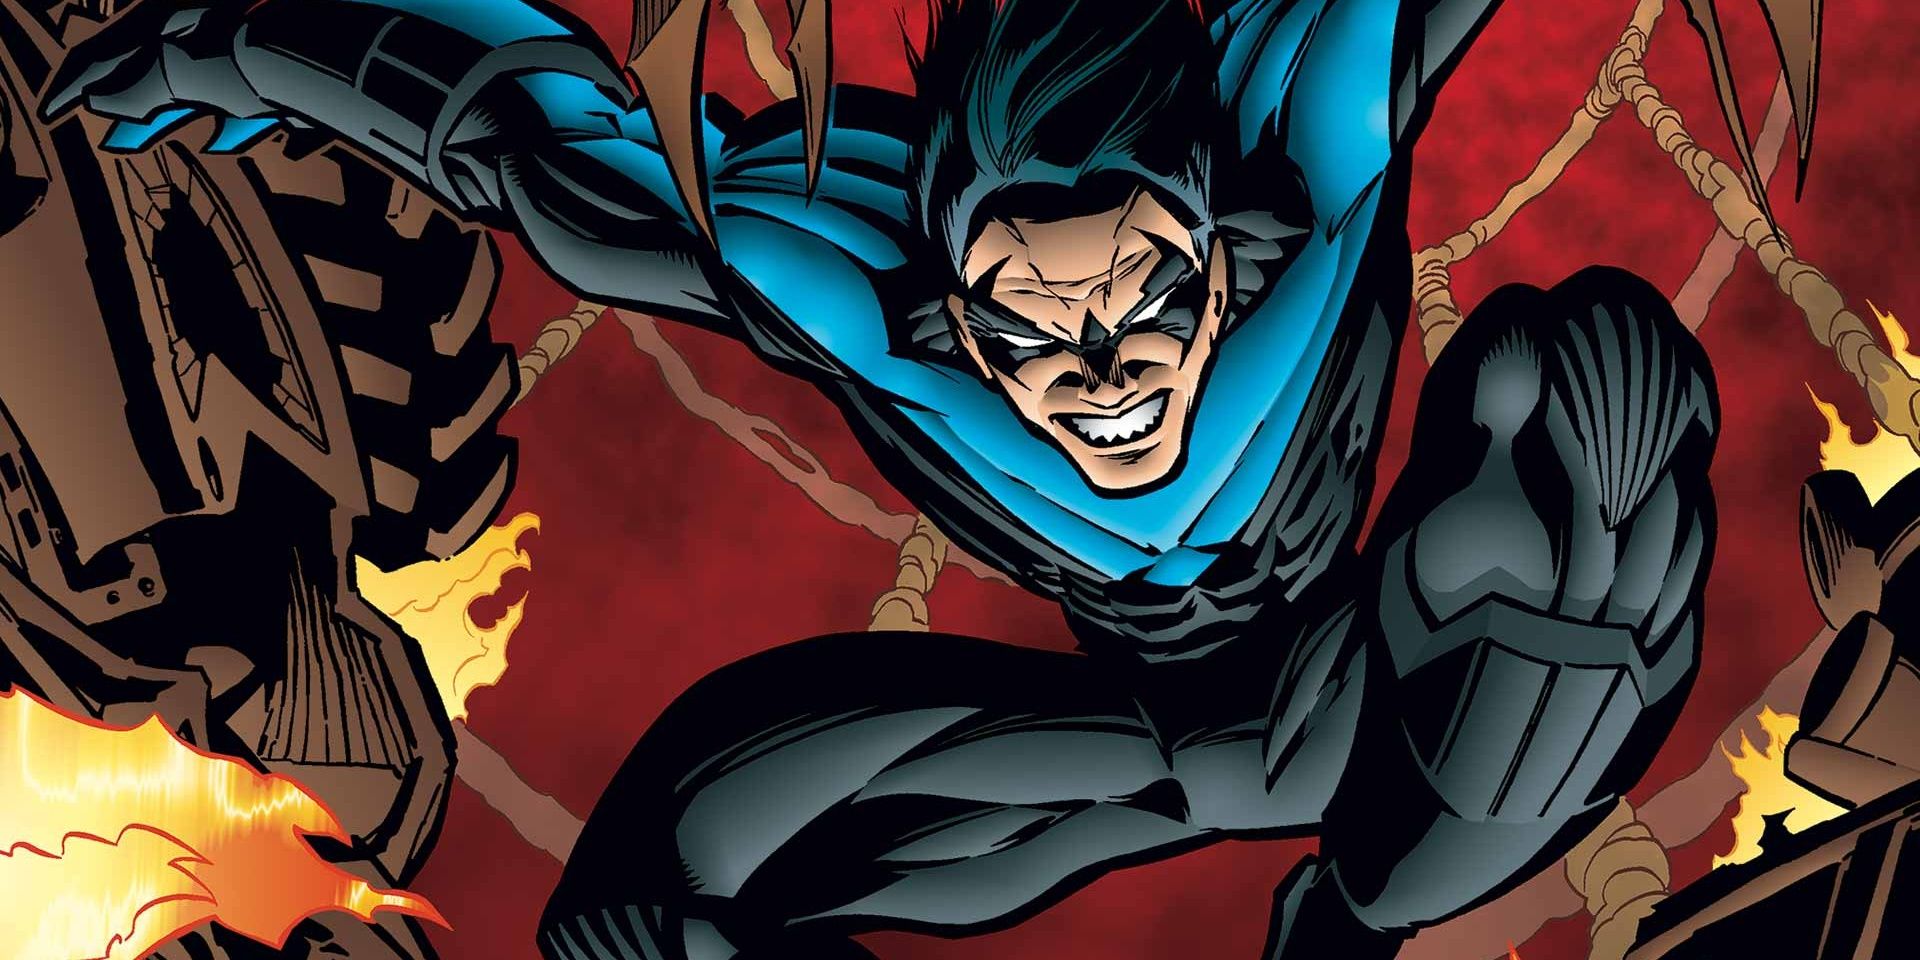 Nightwing leaps into action in DC Comics